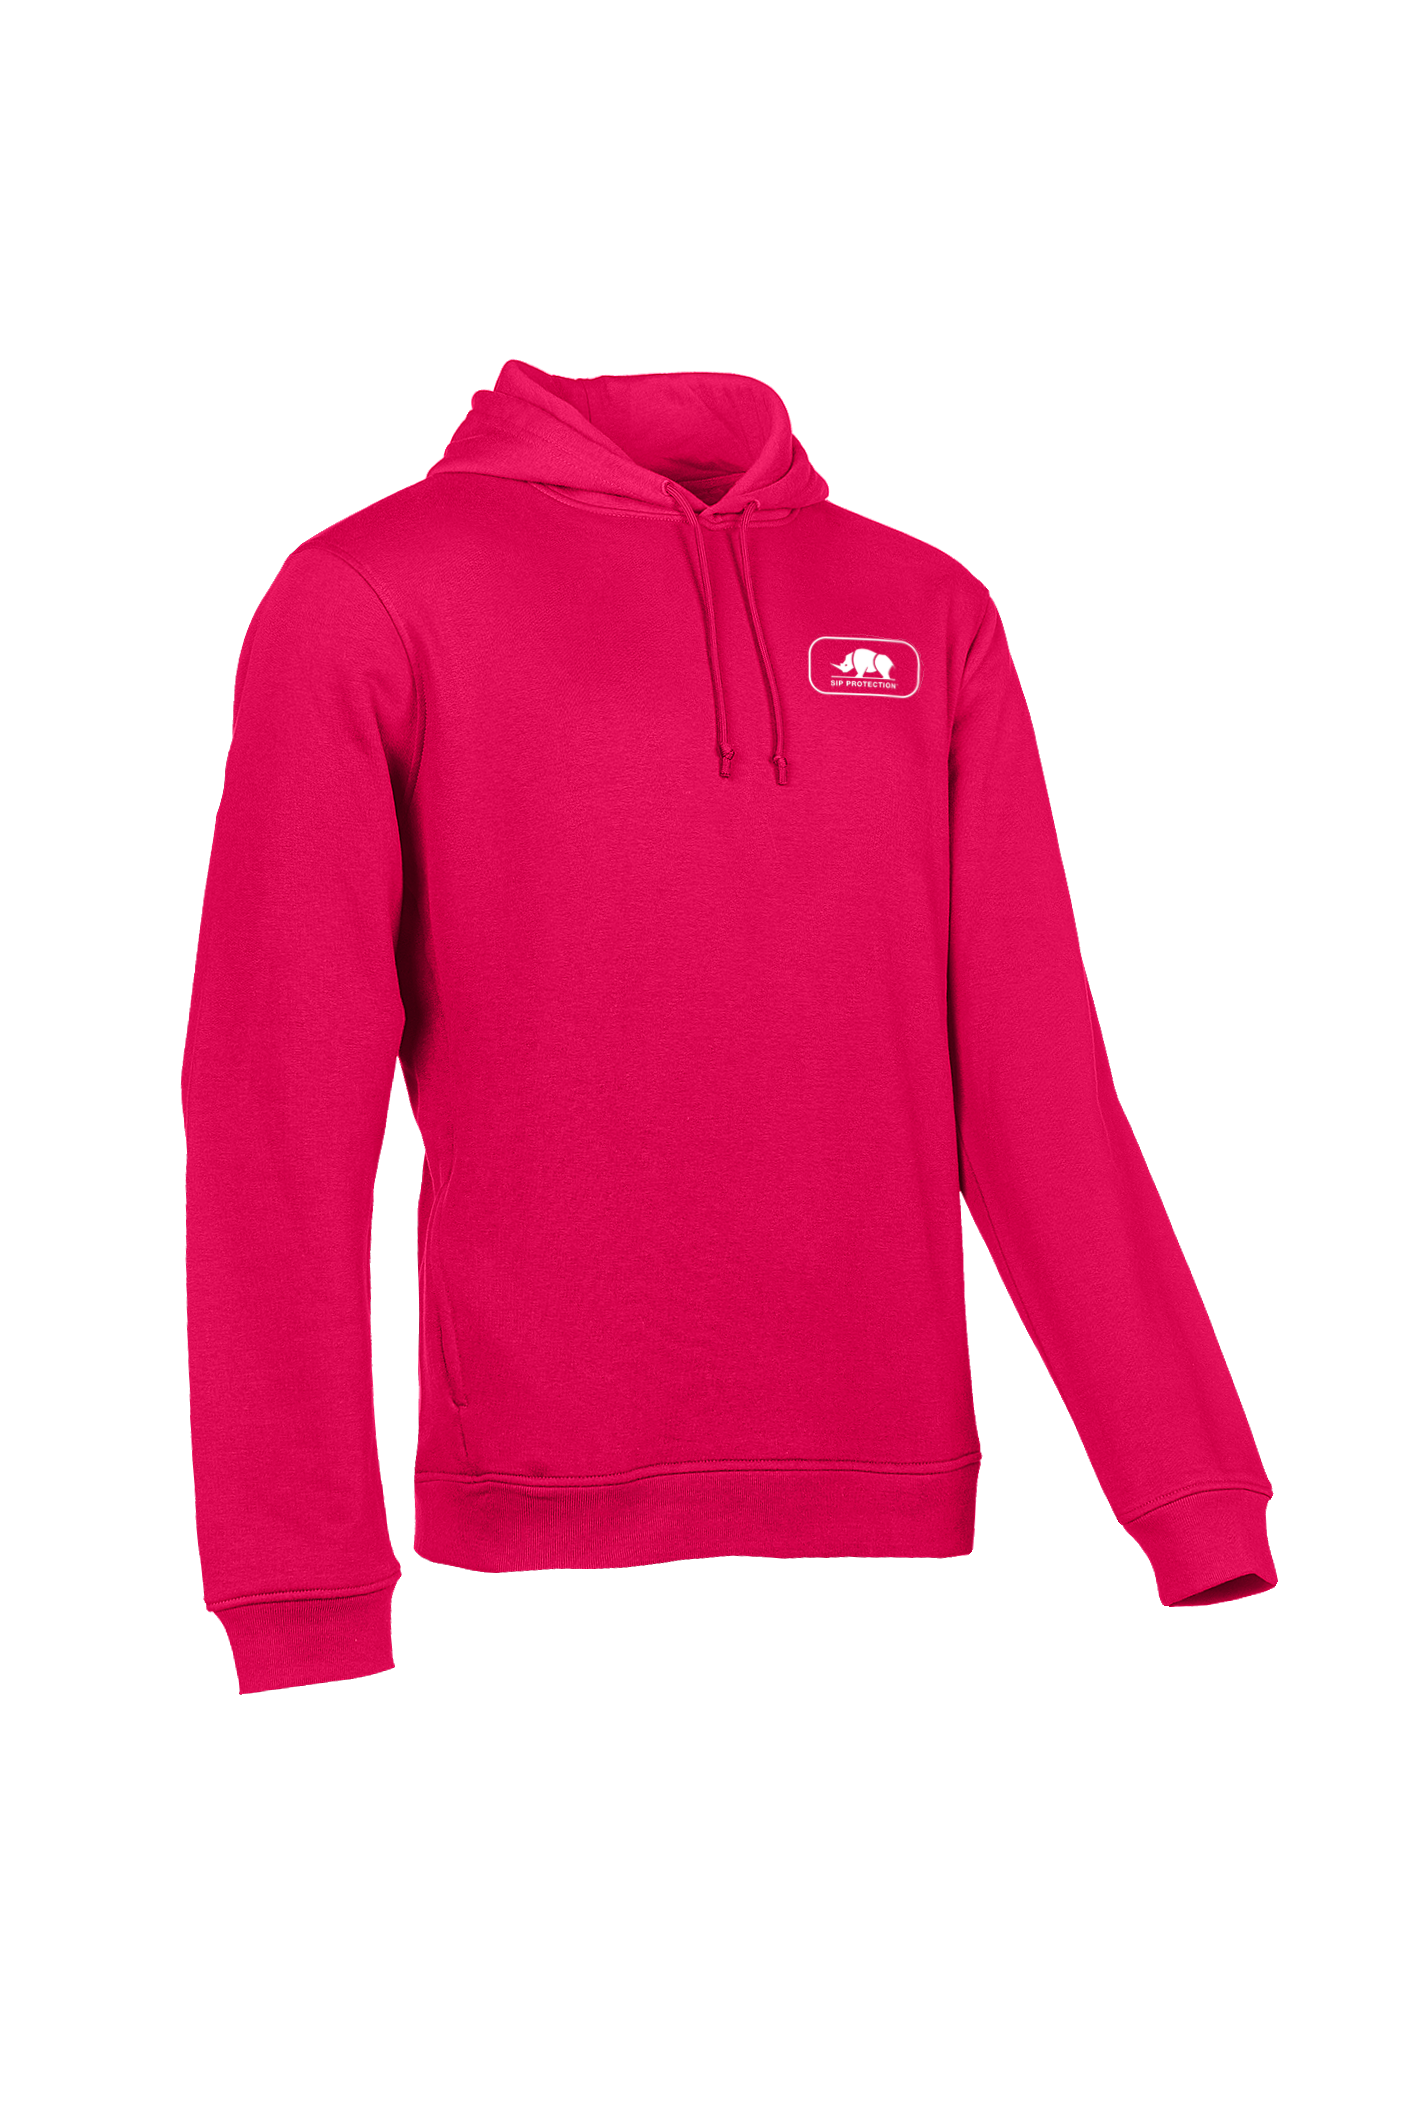 Sip Protection - Promo Hoodie Pullover